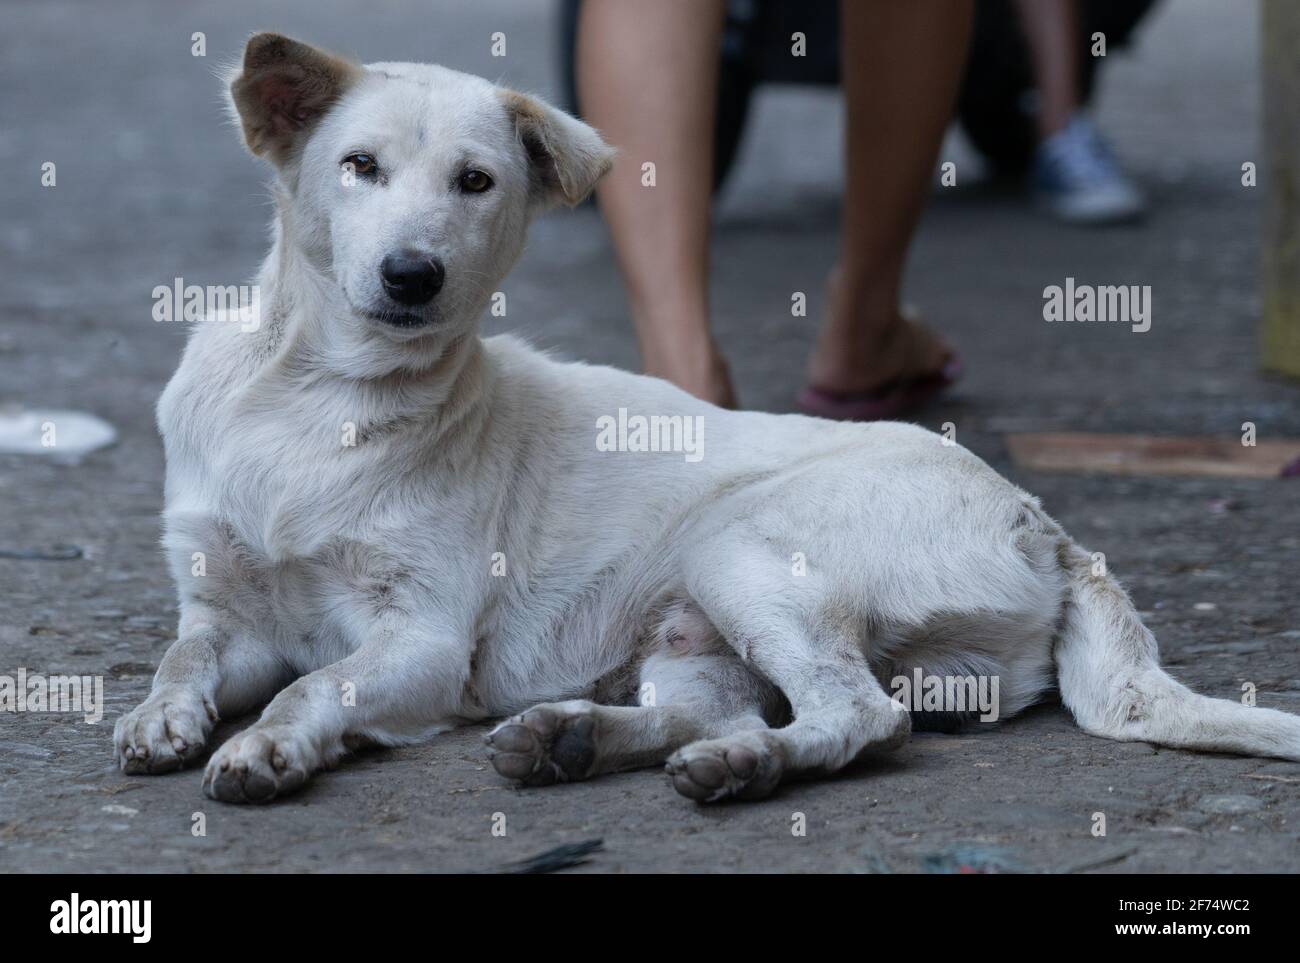 A dog sitting up and looking towards the camera in a market area, Cebu City, Philippines Stock Photo